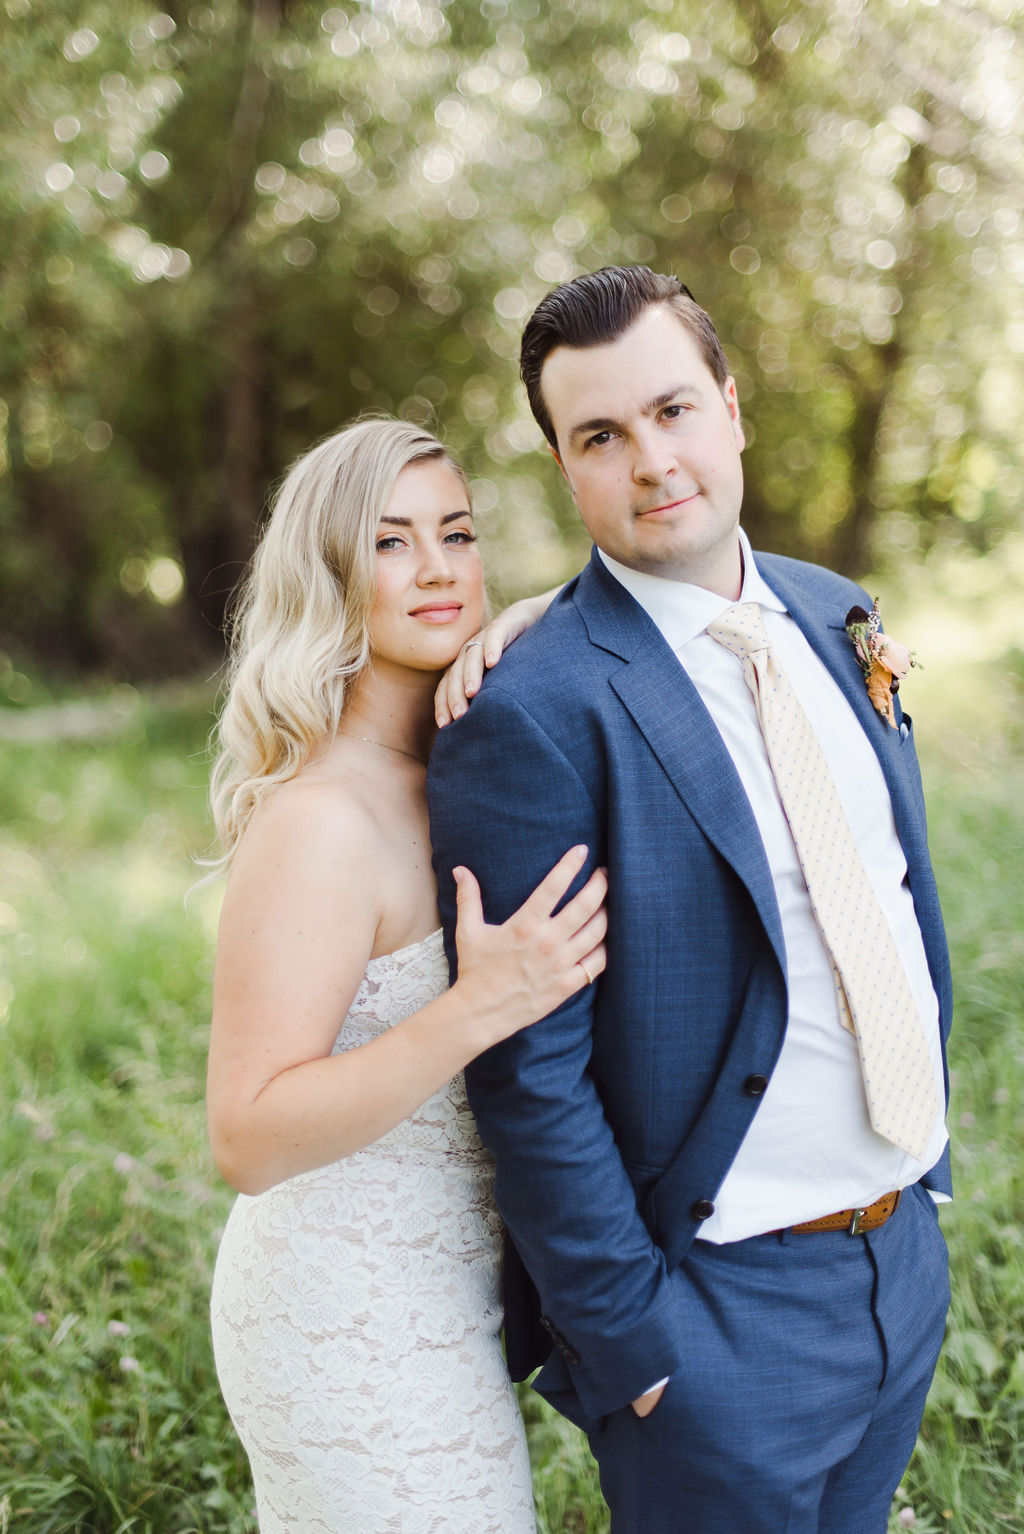 Calgary bride poses while holding onto her groom's arm and shoulder